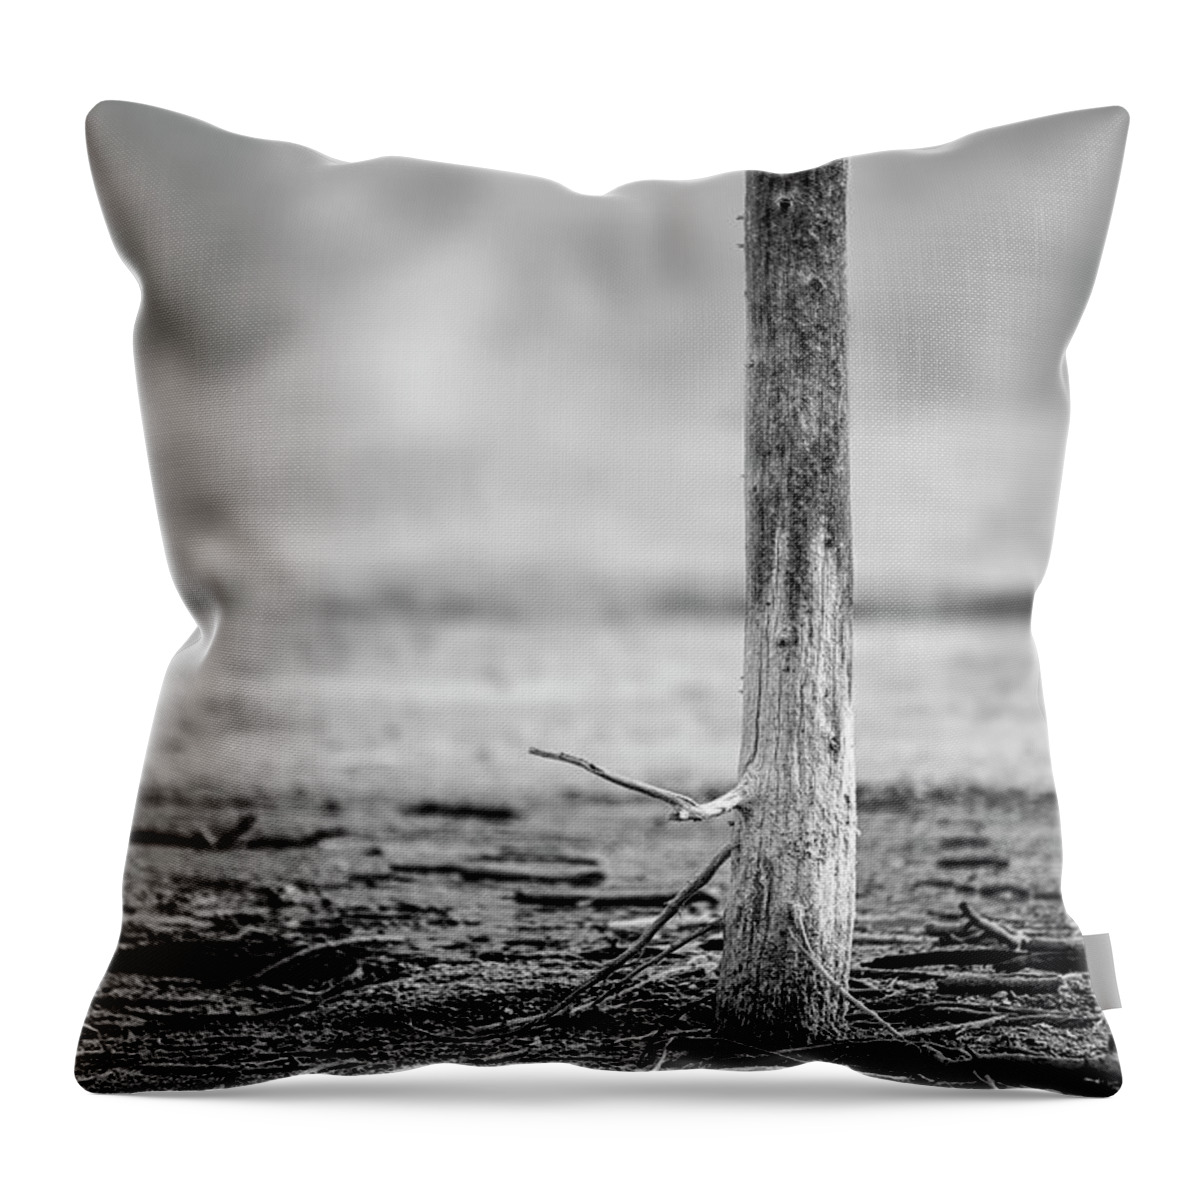 Yellowstone Throw Pillow featuring the photograph Bobby Socks Tree Yellowstone National Park by Joan Carroll